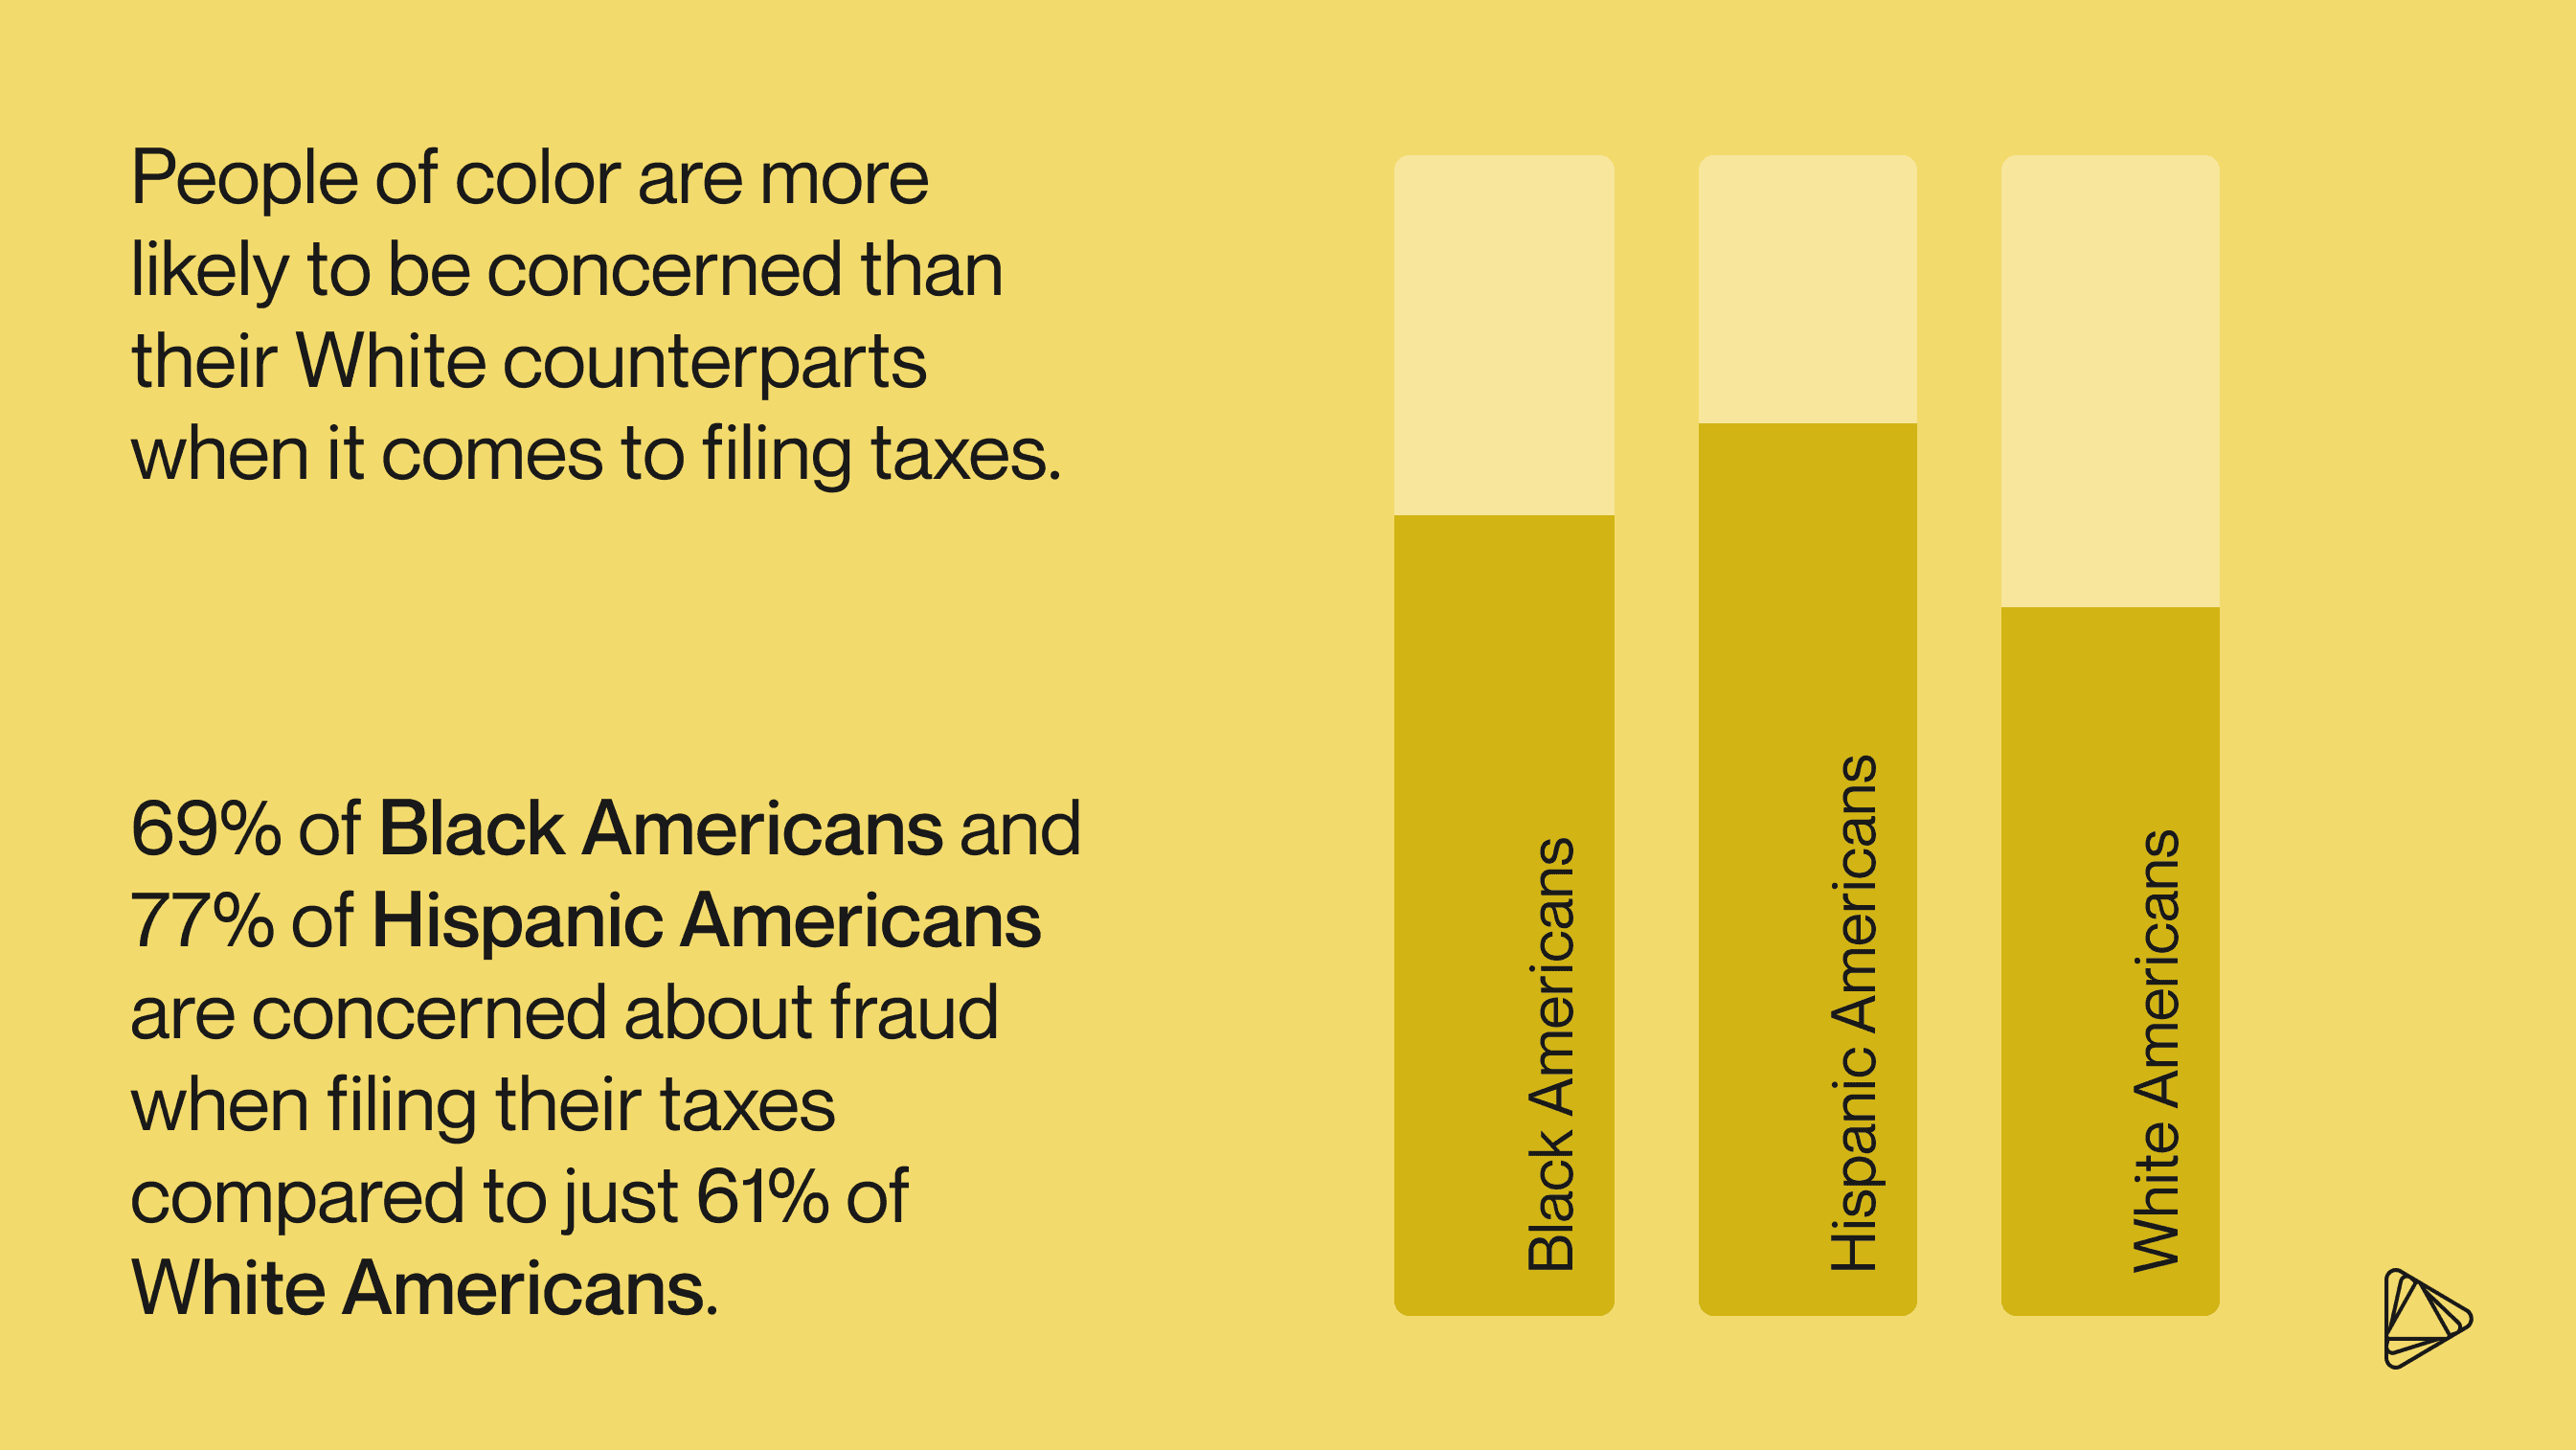 In line 2 fraud taxes by race